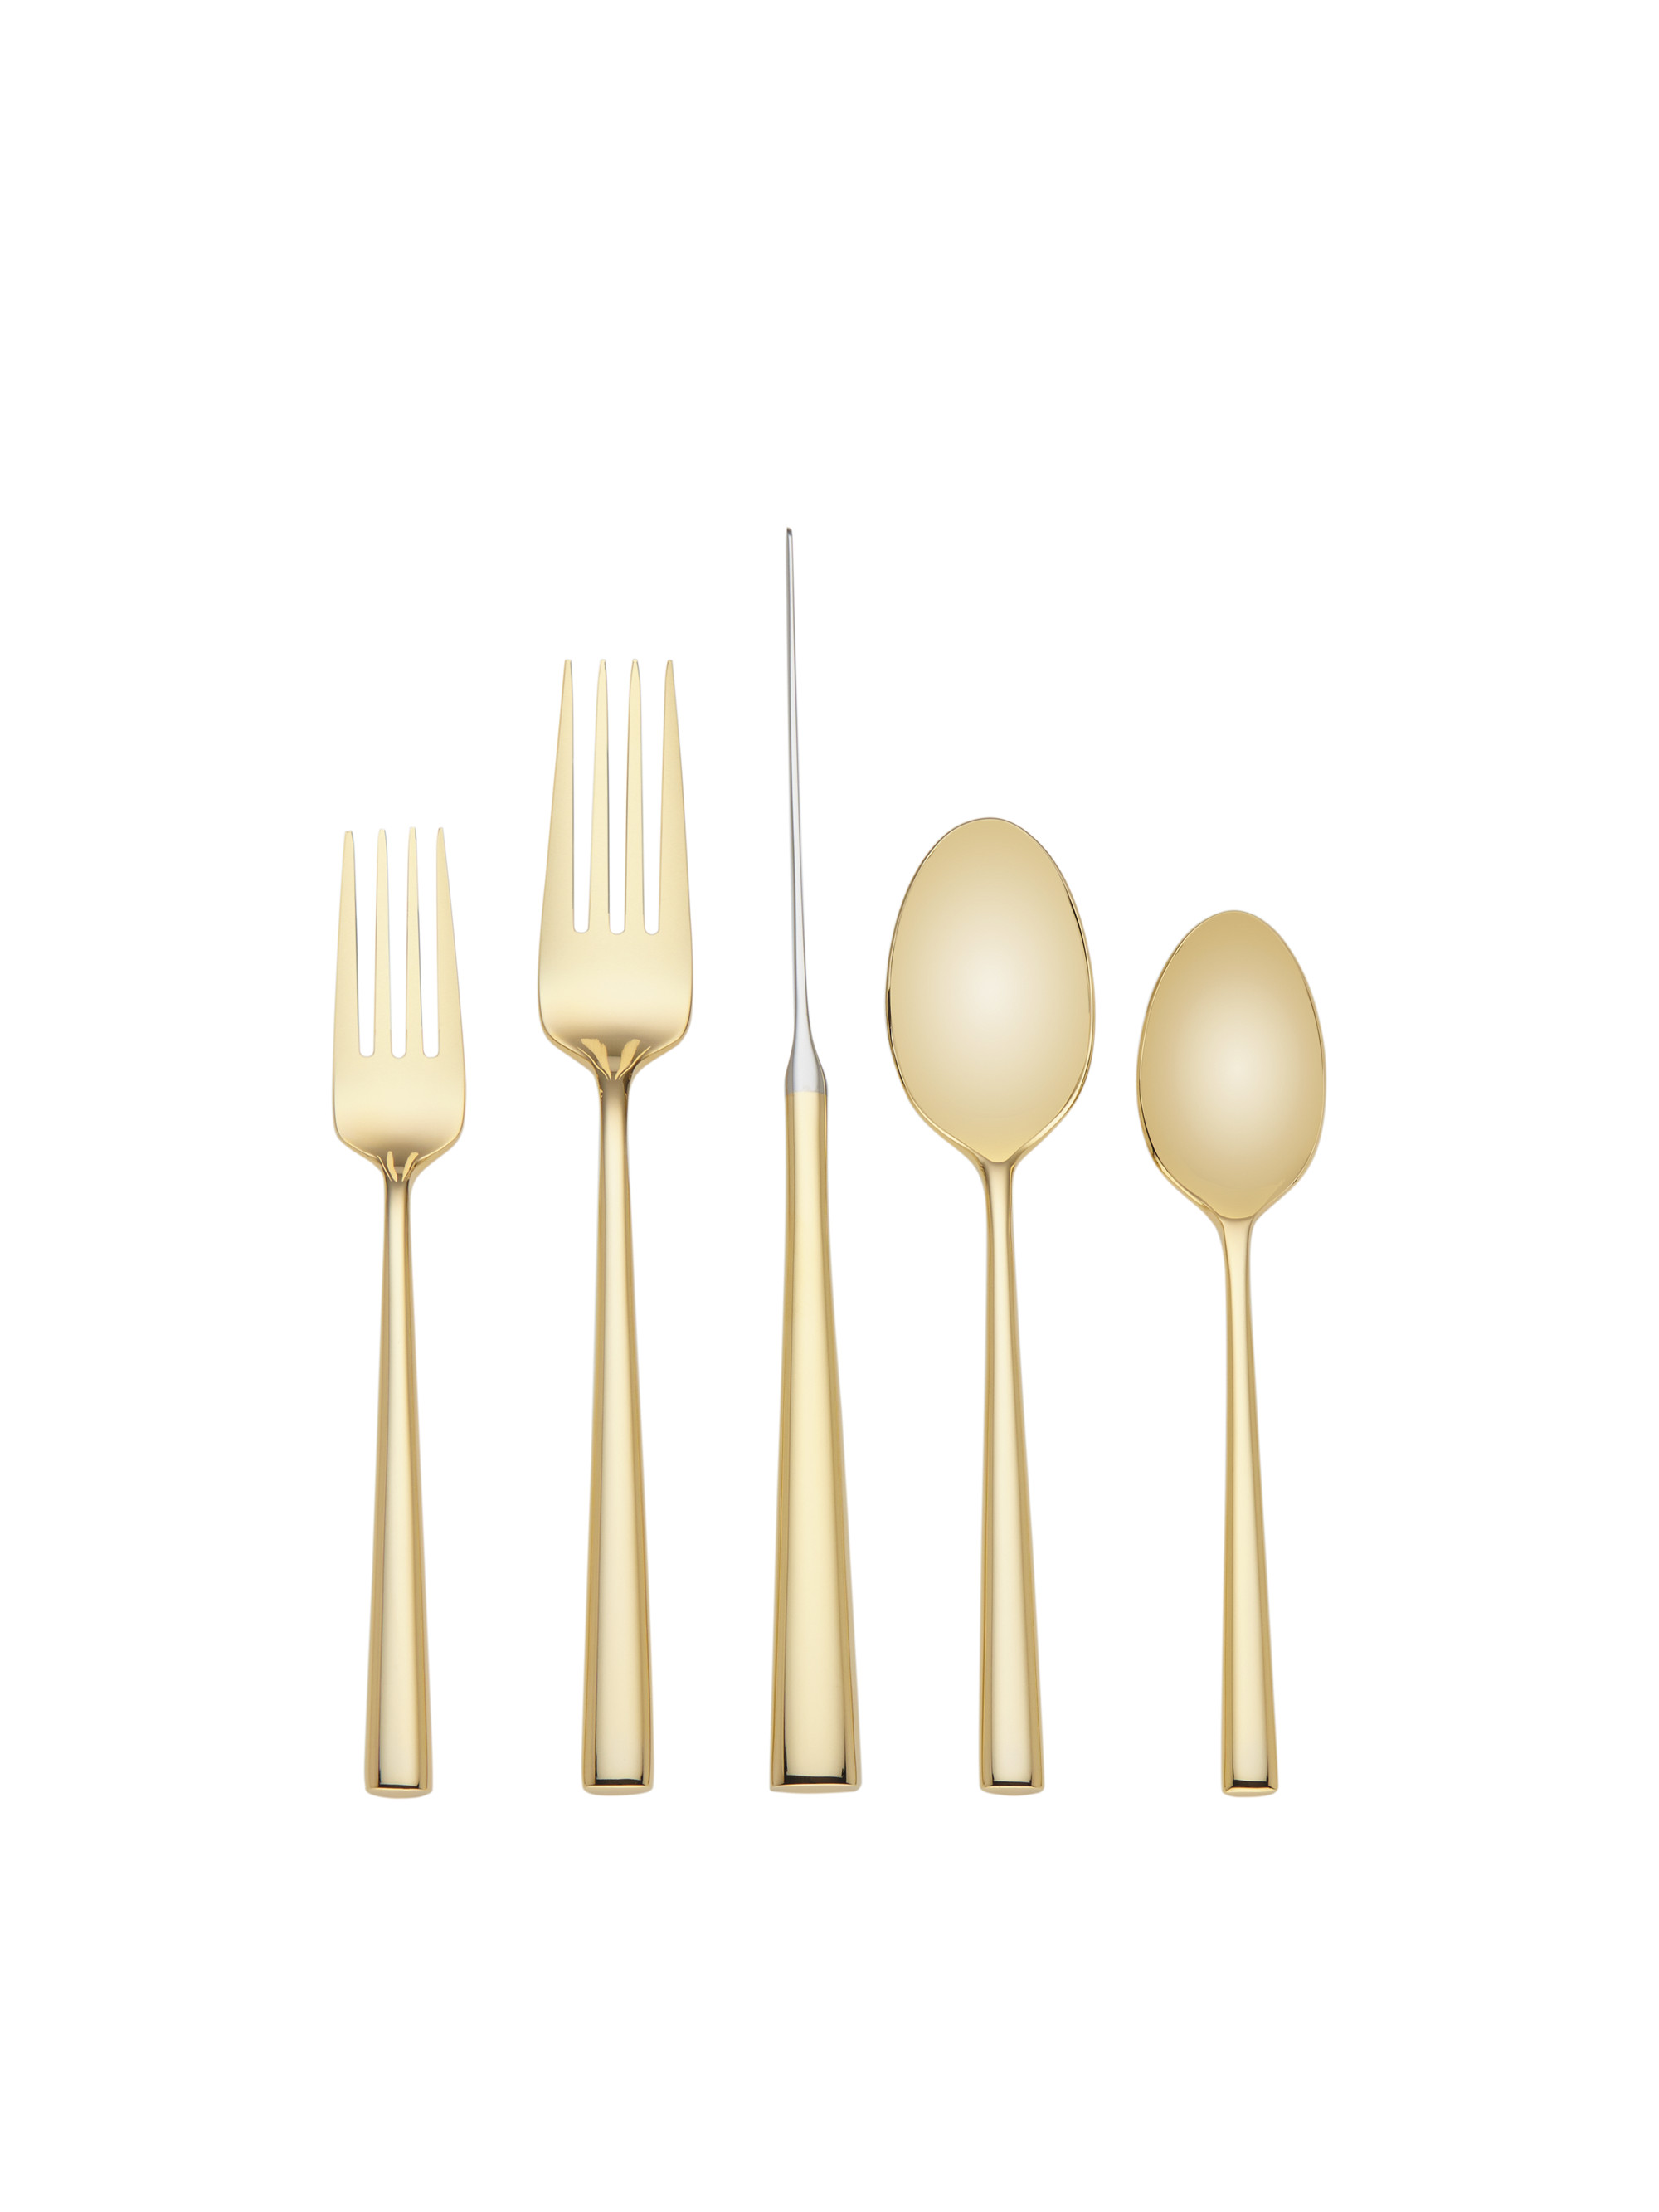 malmo gold 5 piece place setting